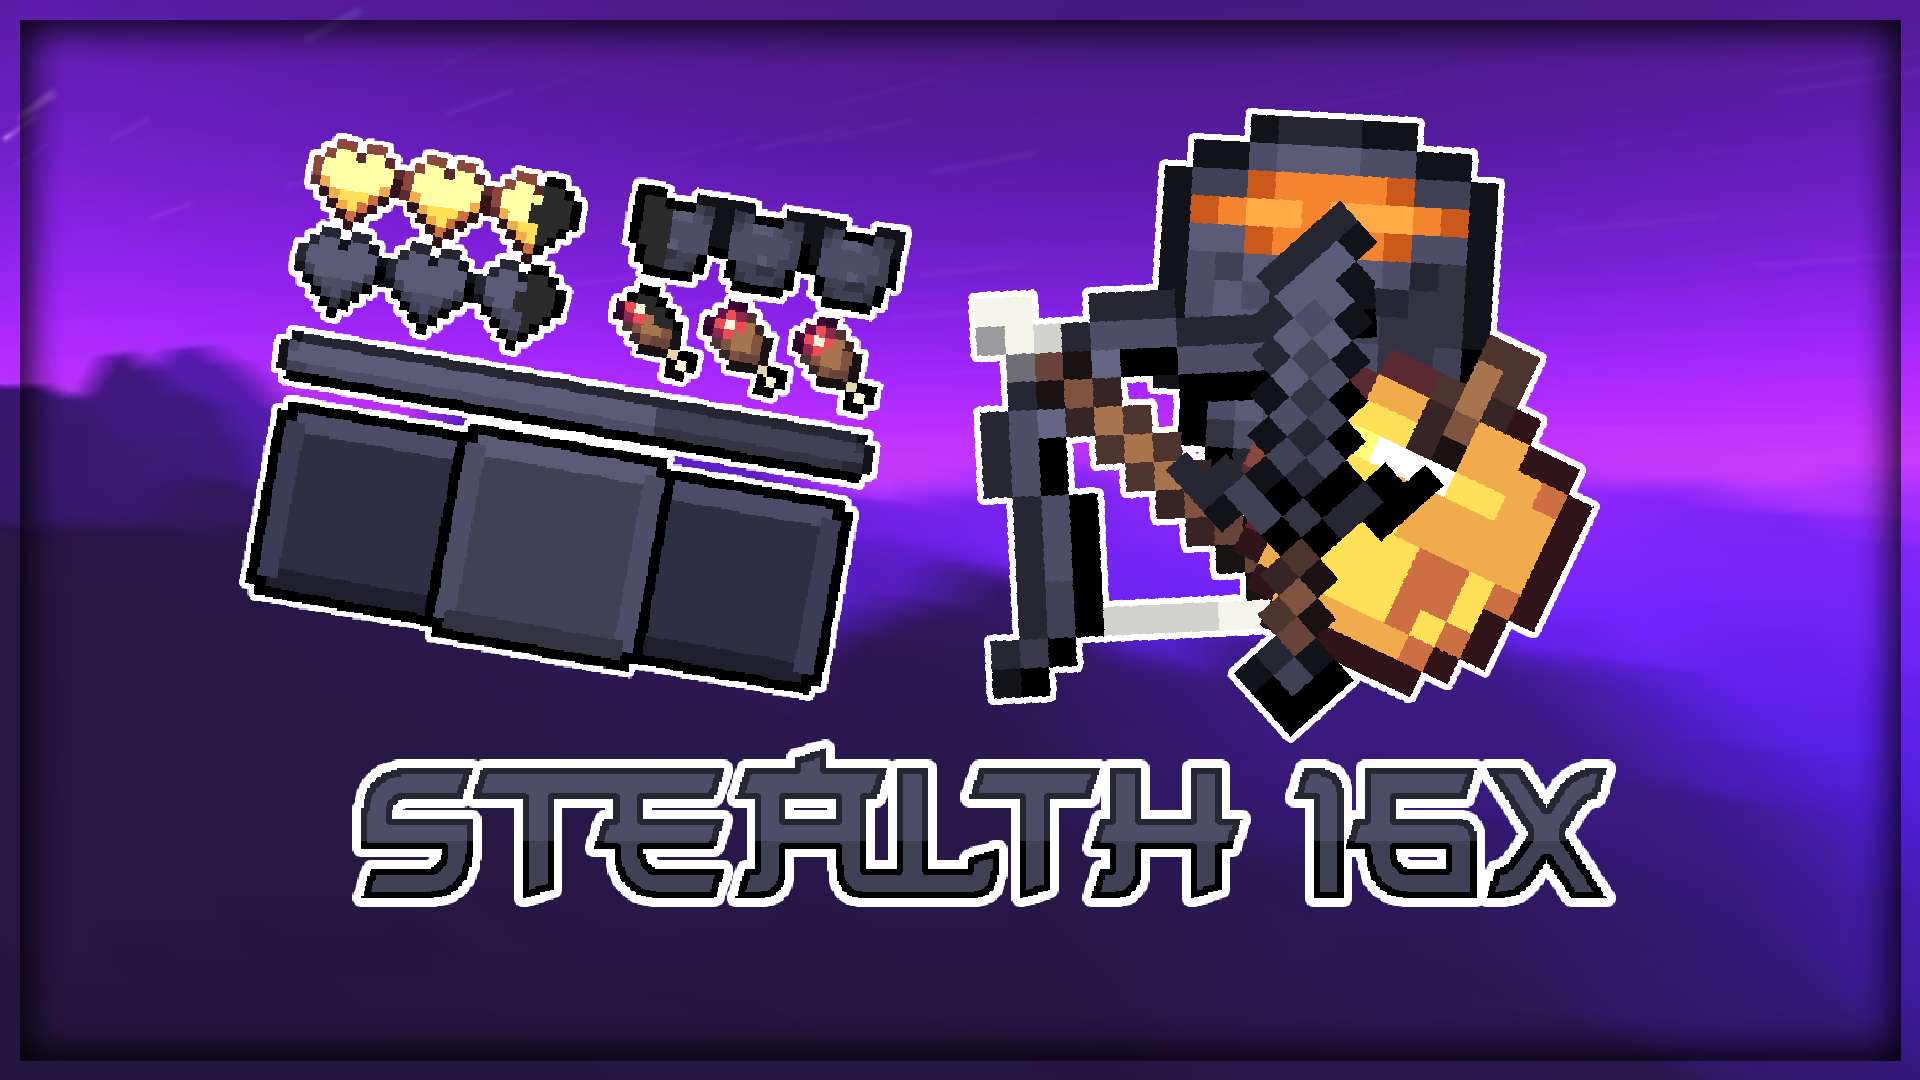 Stealth 16x by jaxxthatsall on PvPRP